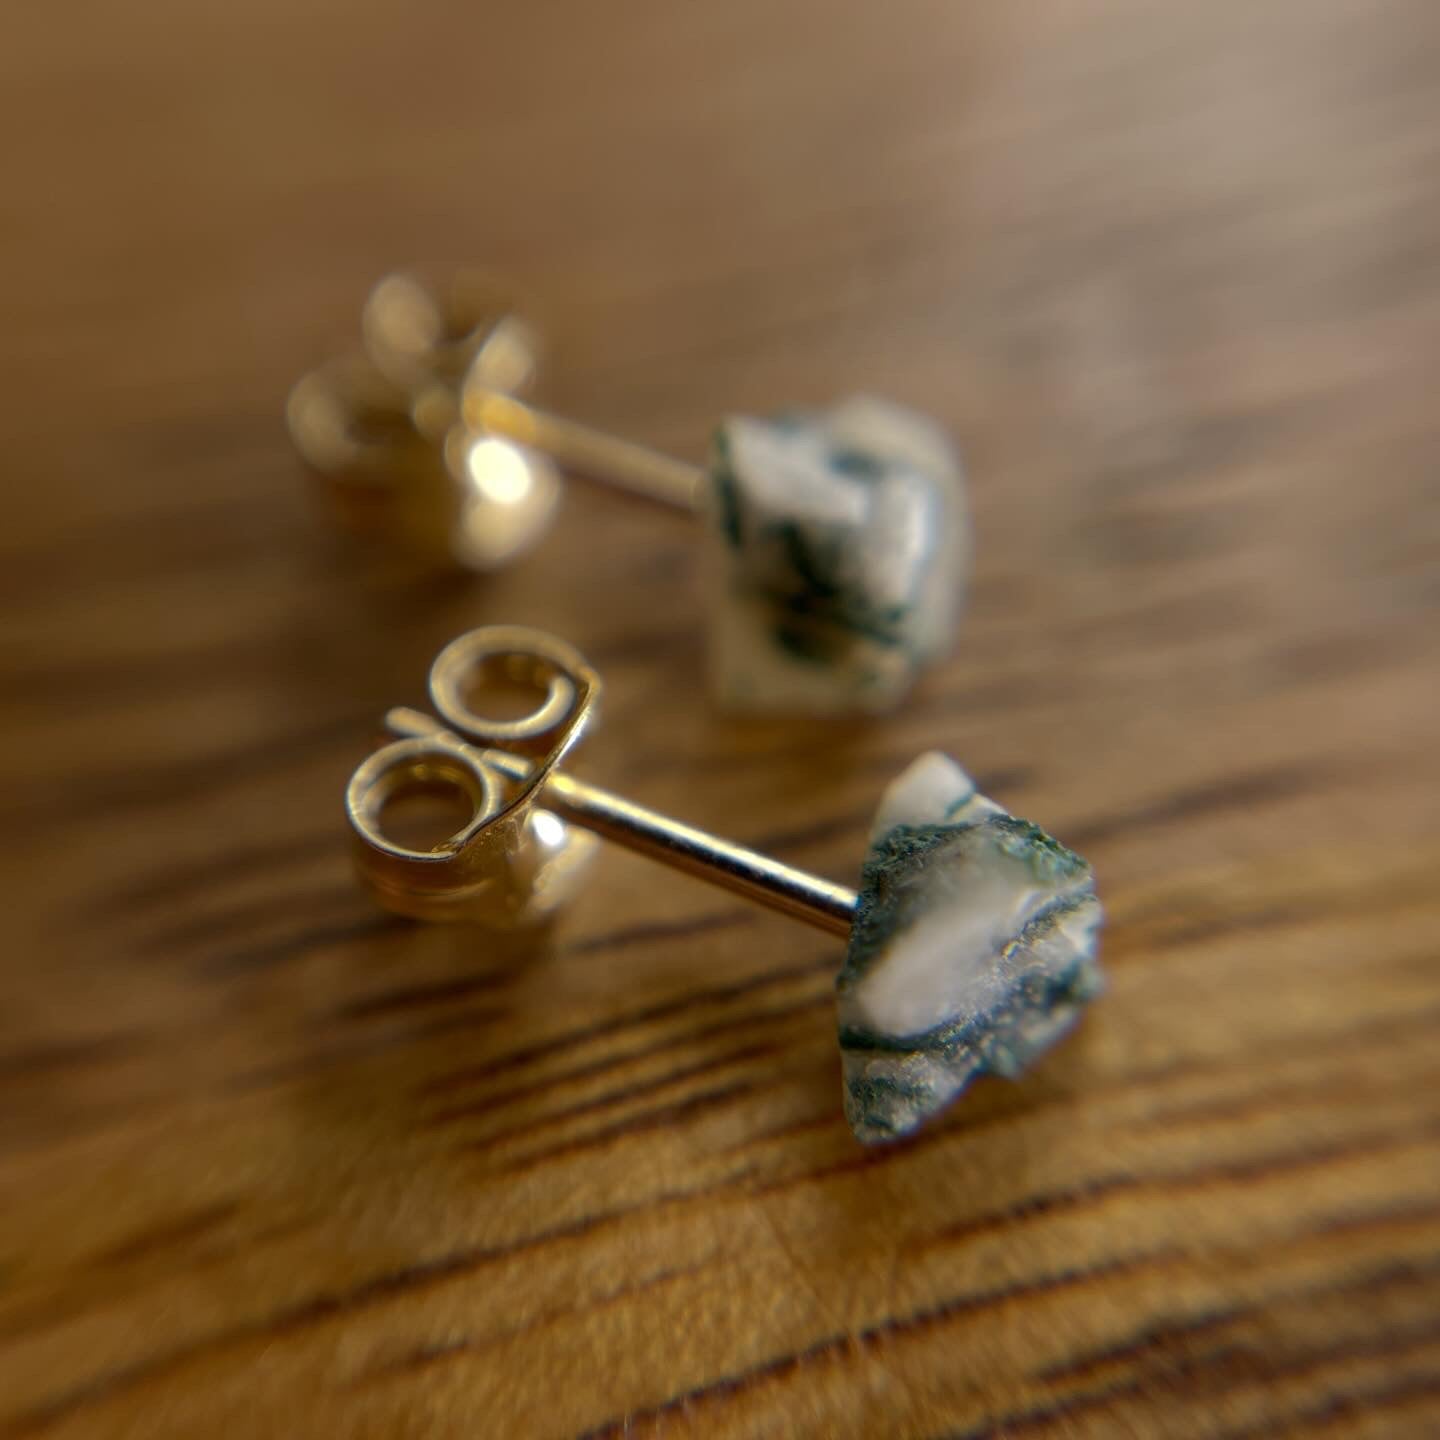 9ct or 18ct Gold Moss Agate Stud Earrings, Natural Moss Agate Earrings, Raw Crystal Earrings, Raw Moss Agate Jewellery, Minimalist Earring Studs